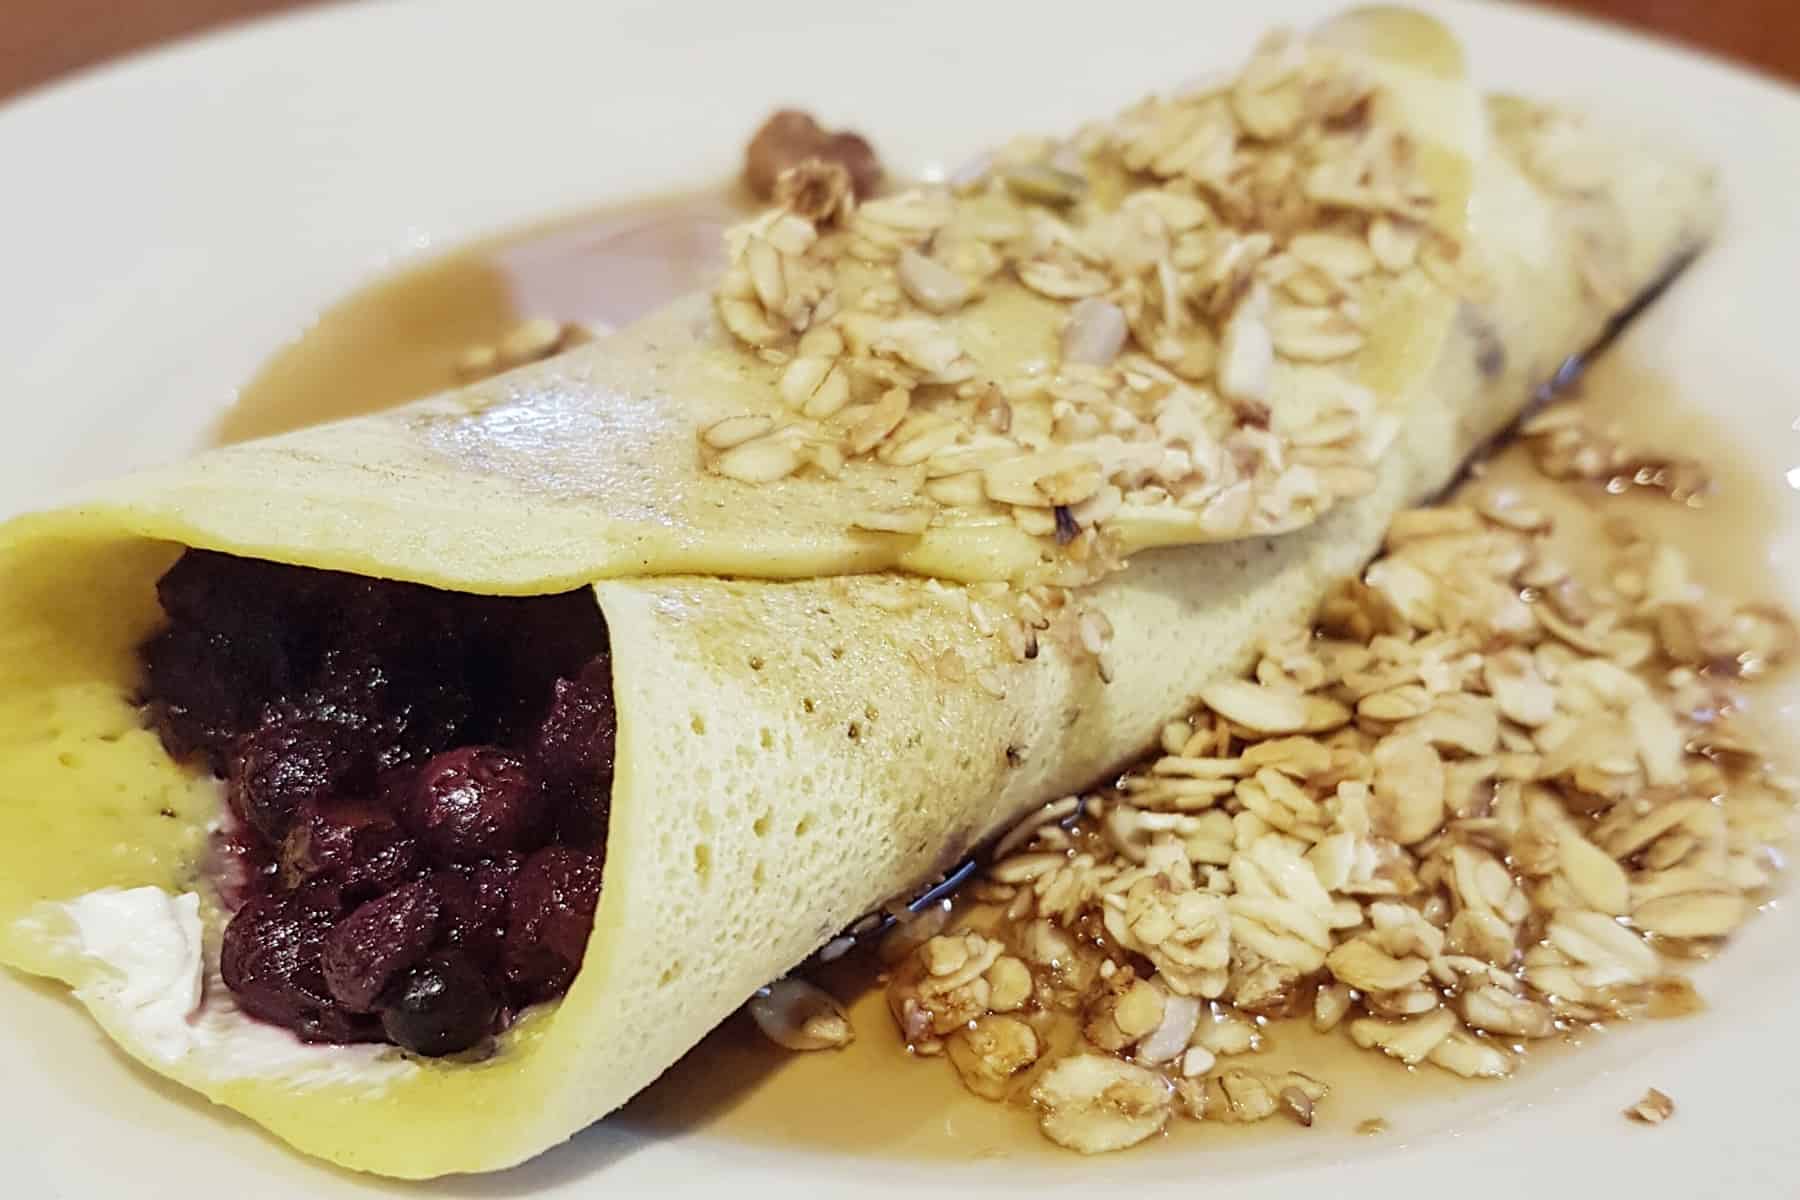 A ployes buckwheat pancake filled with jammy blueberries and yoghurt and topped with granola.